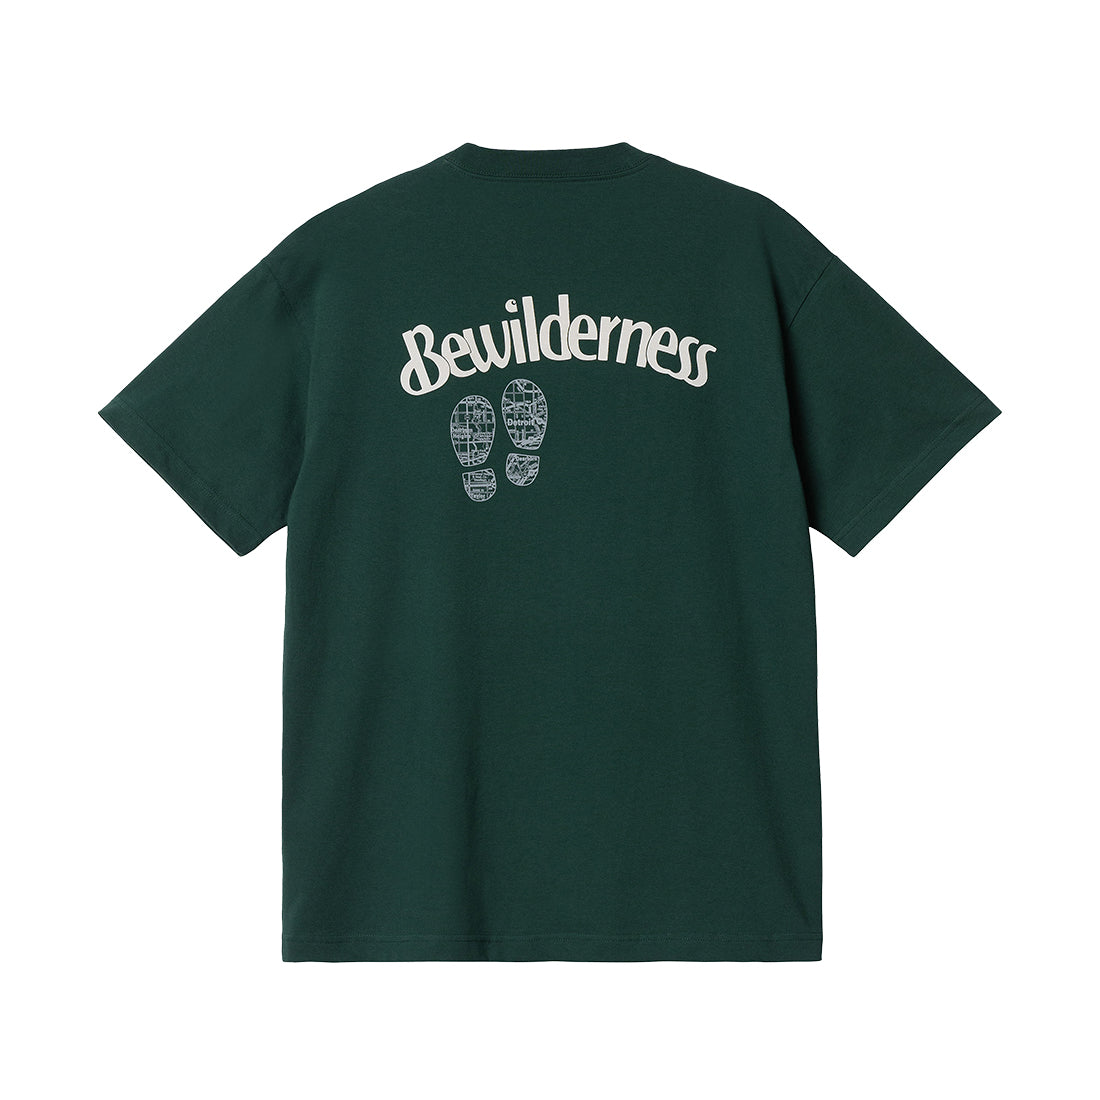 S/S Bewilderness T-Shirt - Discovery Green